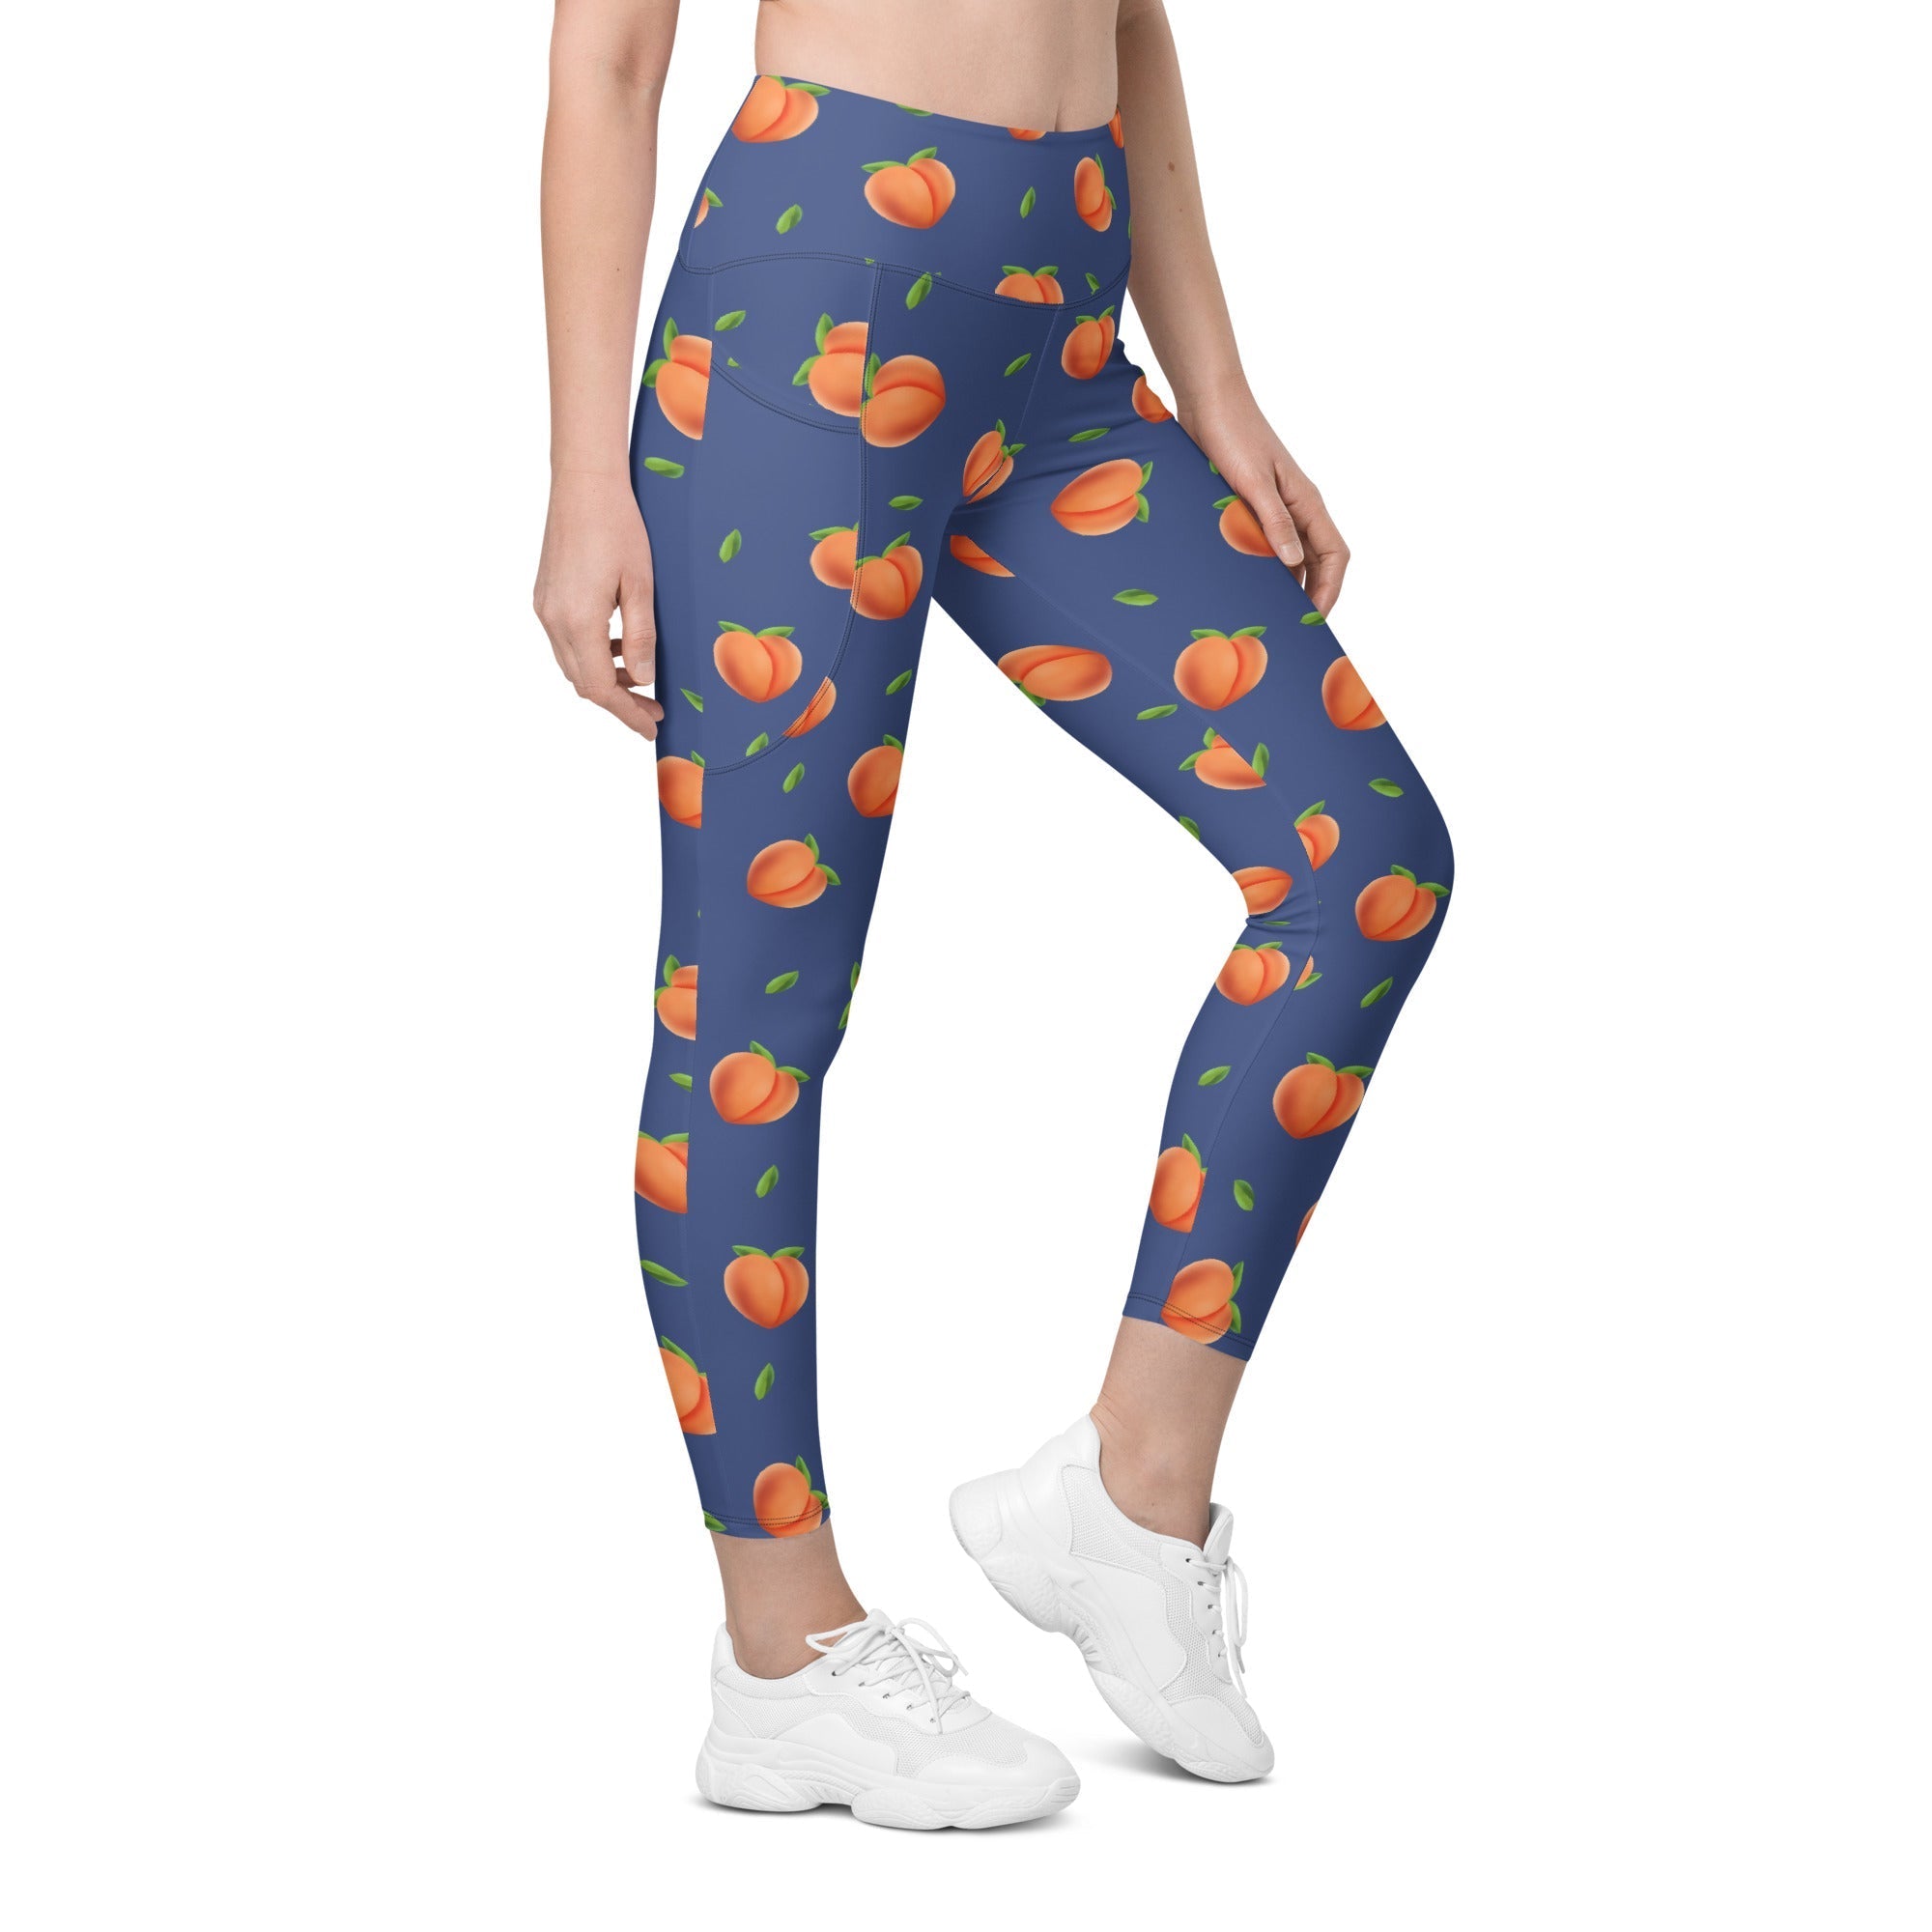 Peachy Leggings With Pockets